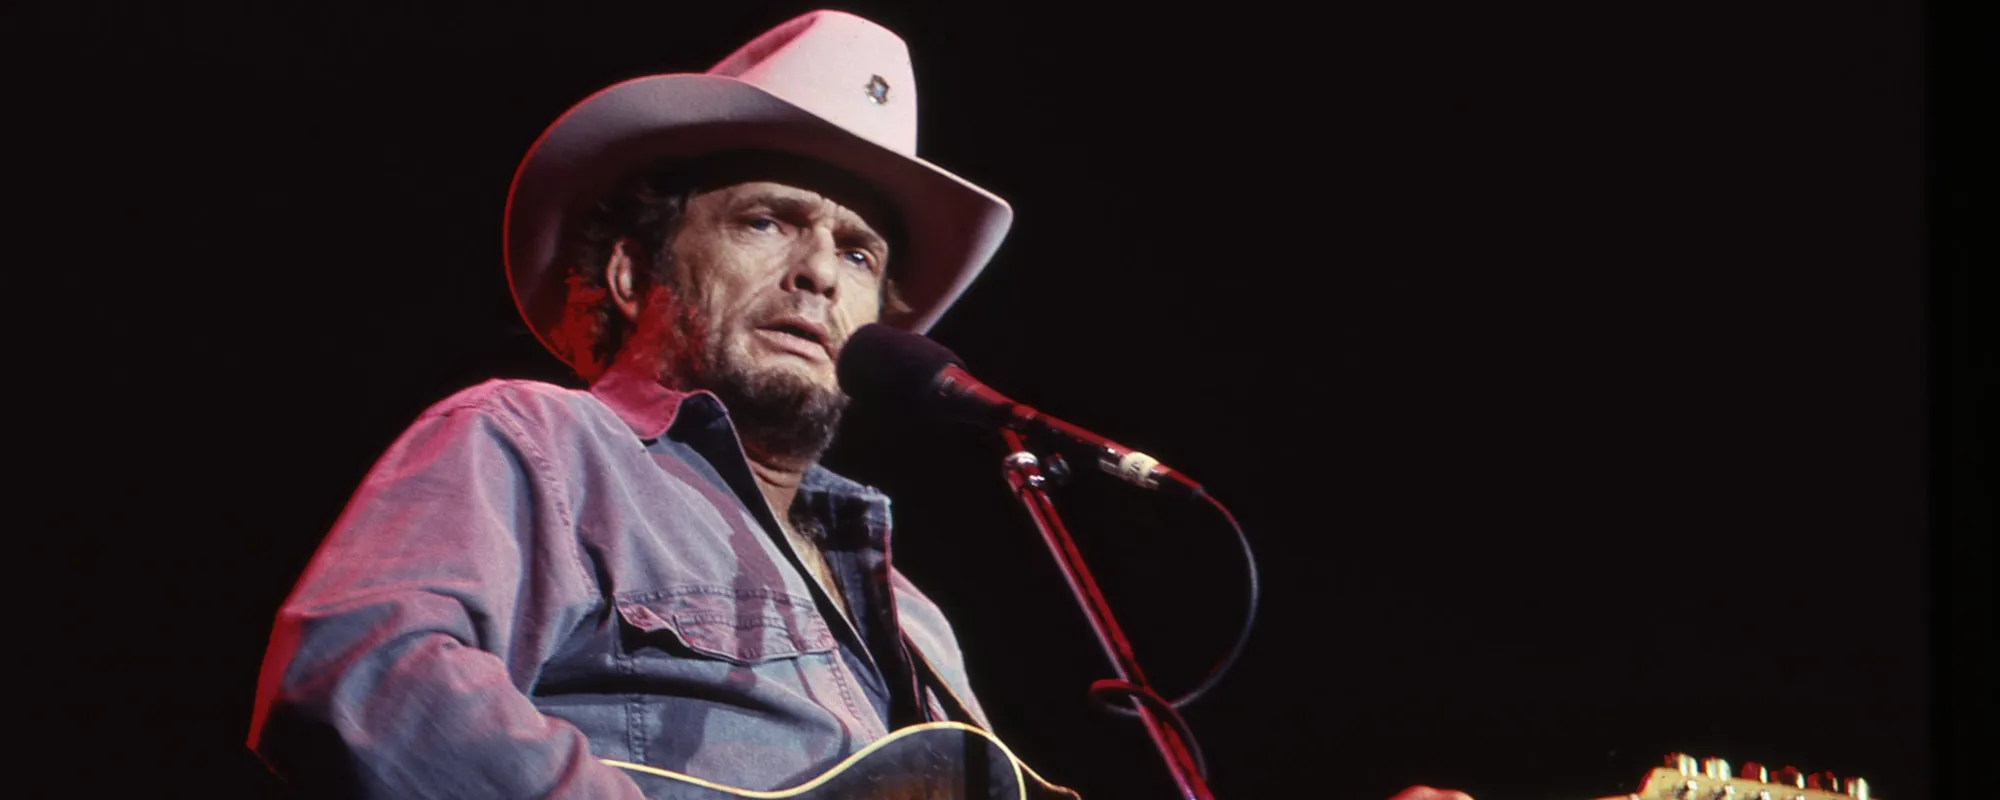 Behind the Song Lyrics: “Today I Started Loving You Again,” Merle Haggard